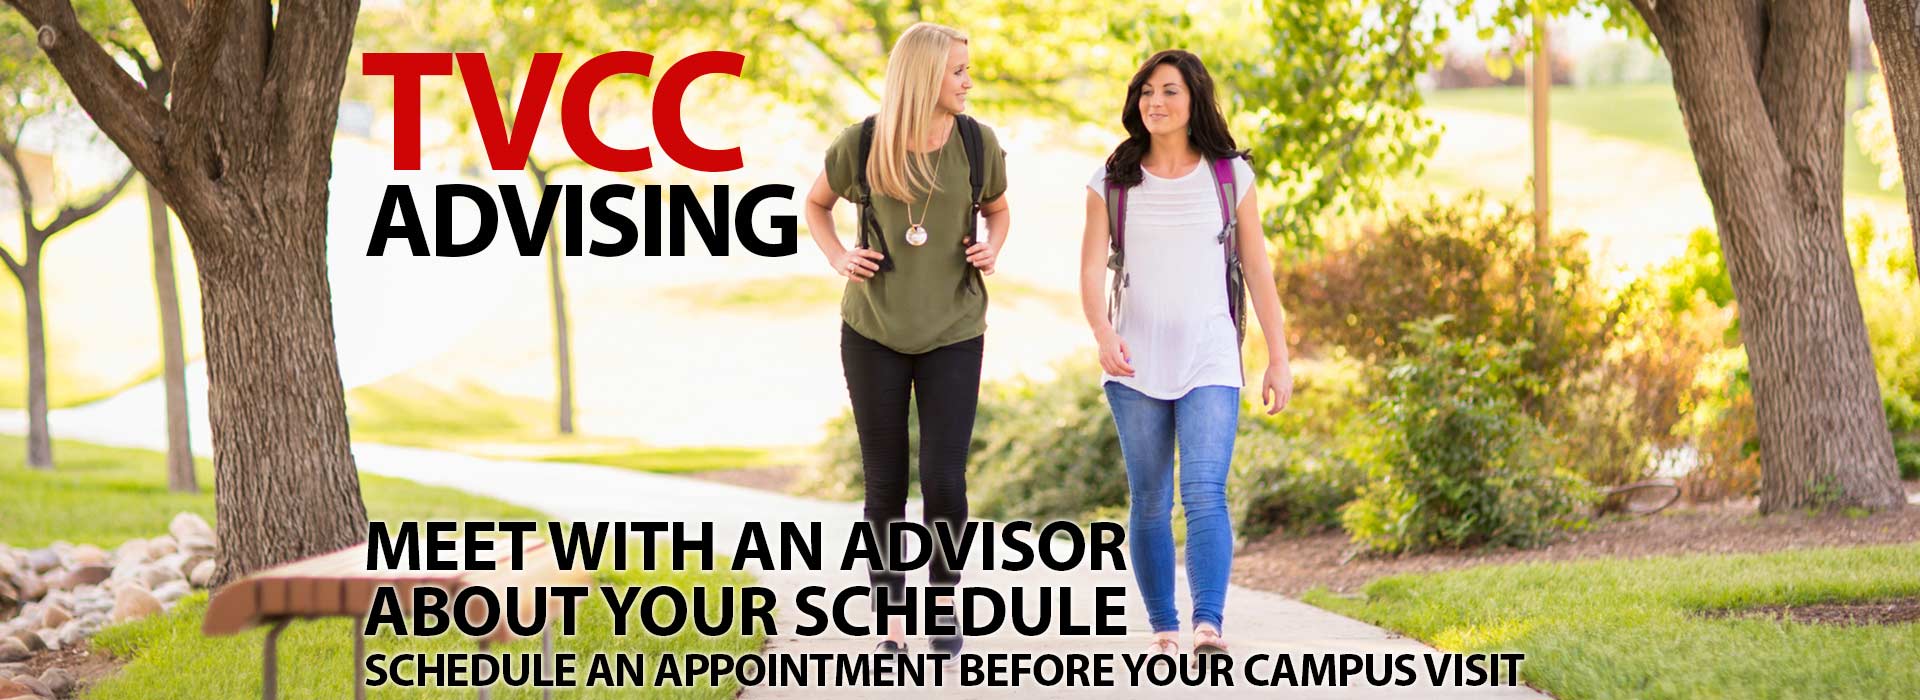 Meet with an advisor about your schedule. Schedule an appointment before your campus visit!